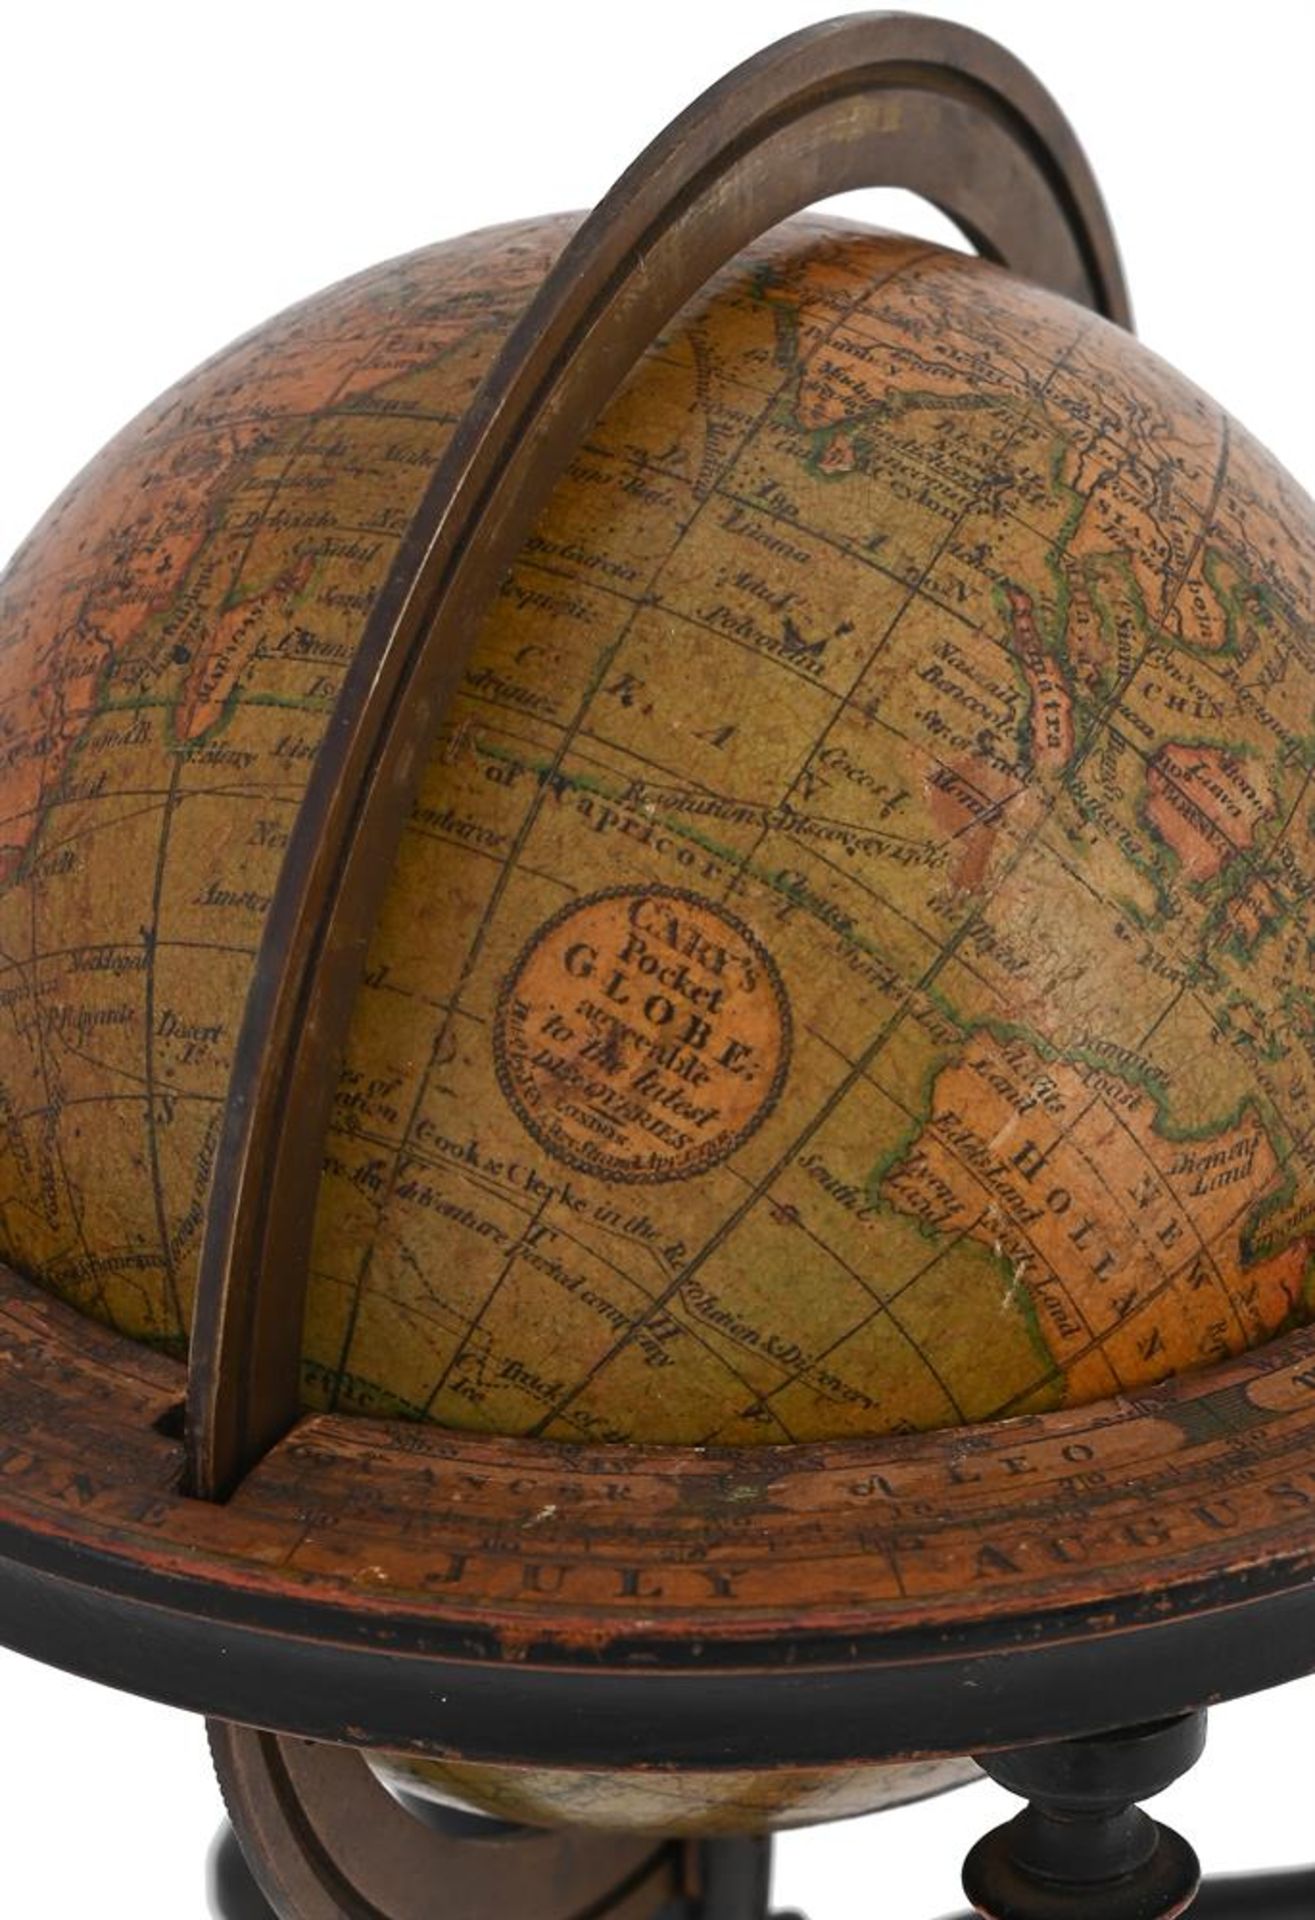 A FINE AND RARE PAIR OF GEORGE III MINIATURE THREE-INCH TABLE GLOBES - Image 5 of 6